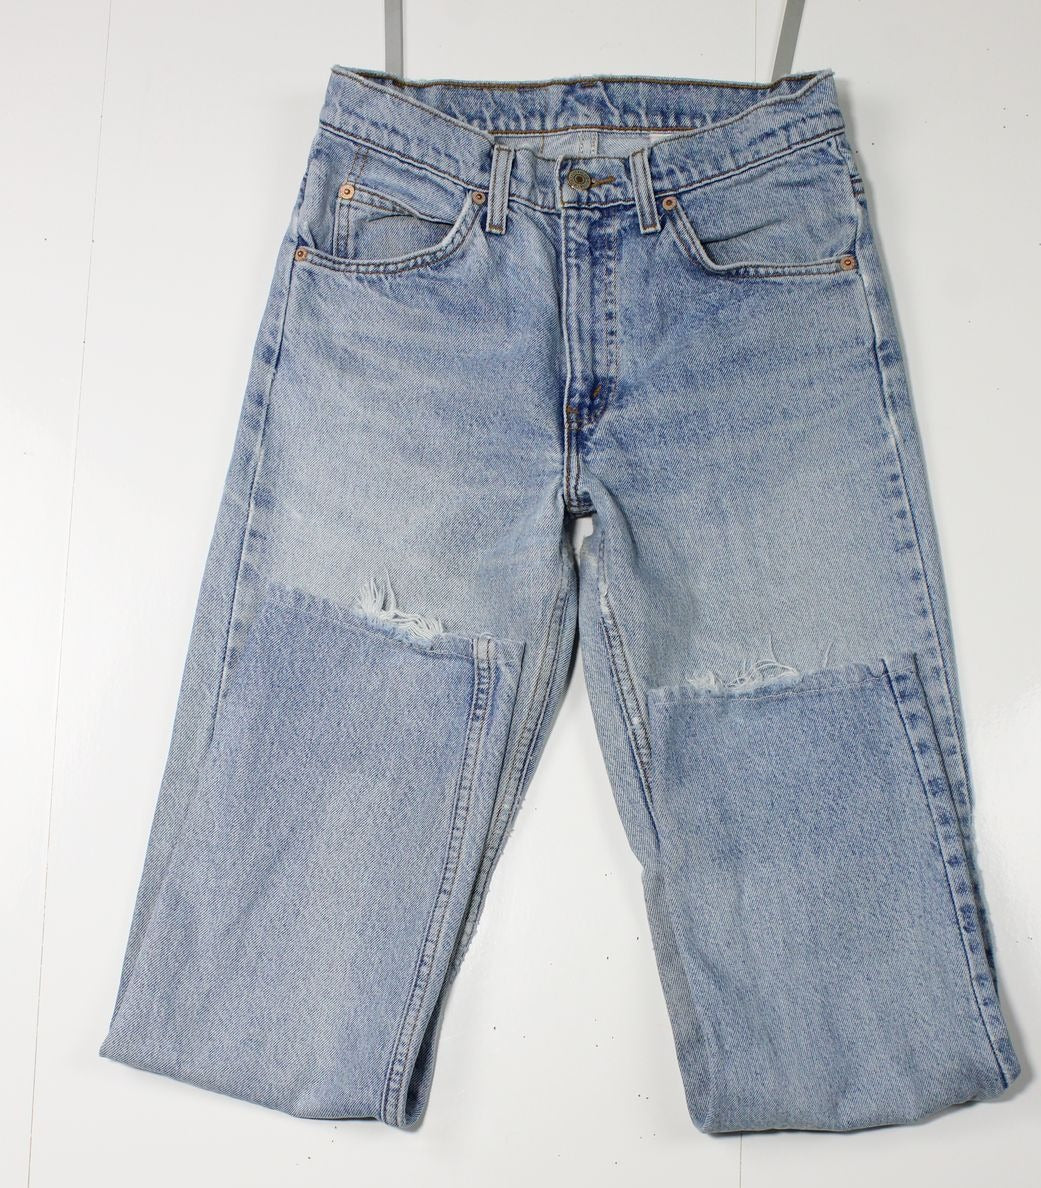 Levi's 505 W29 L32 Made In USA Jeans Vintage